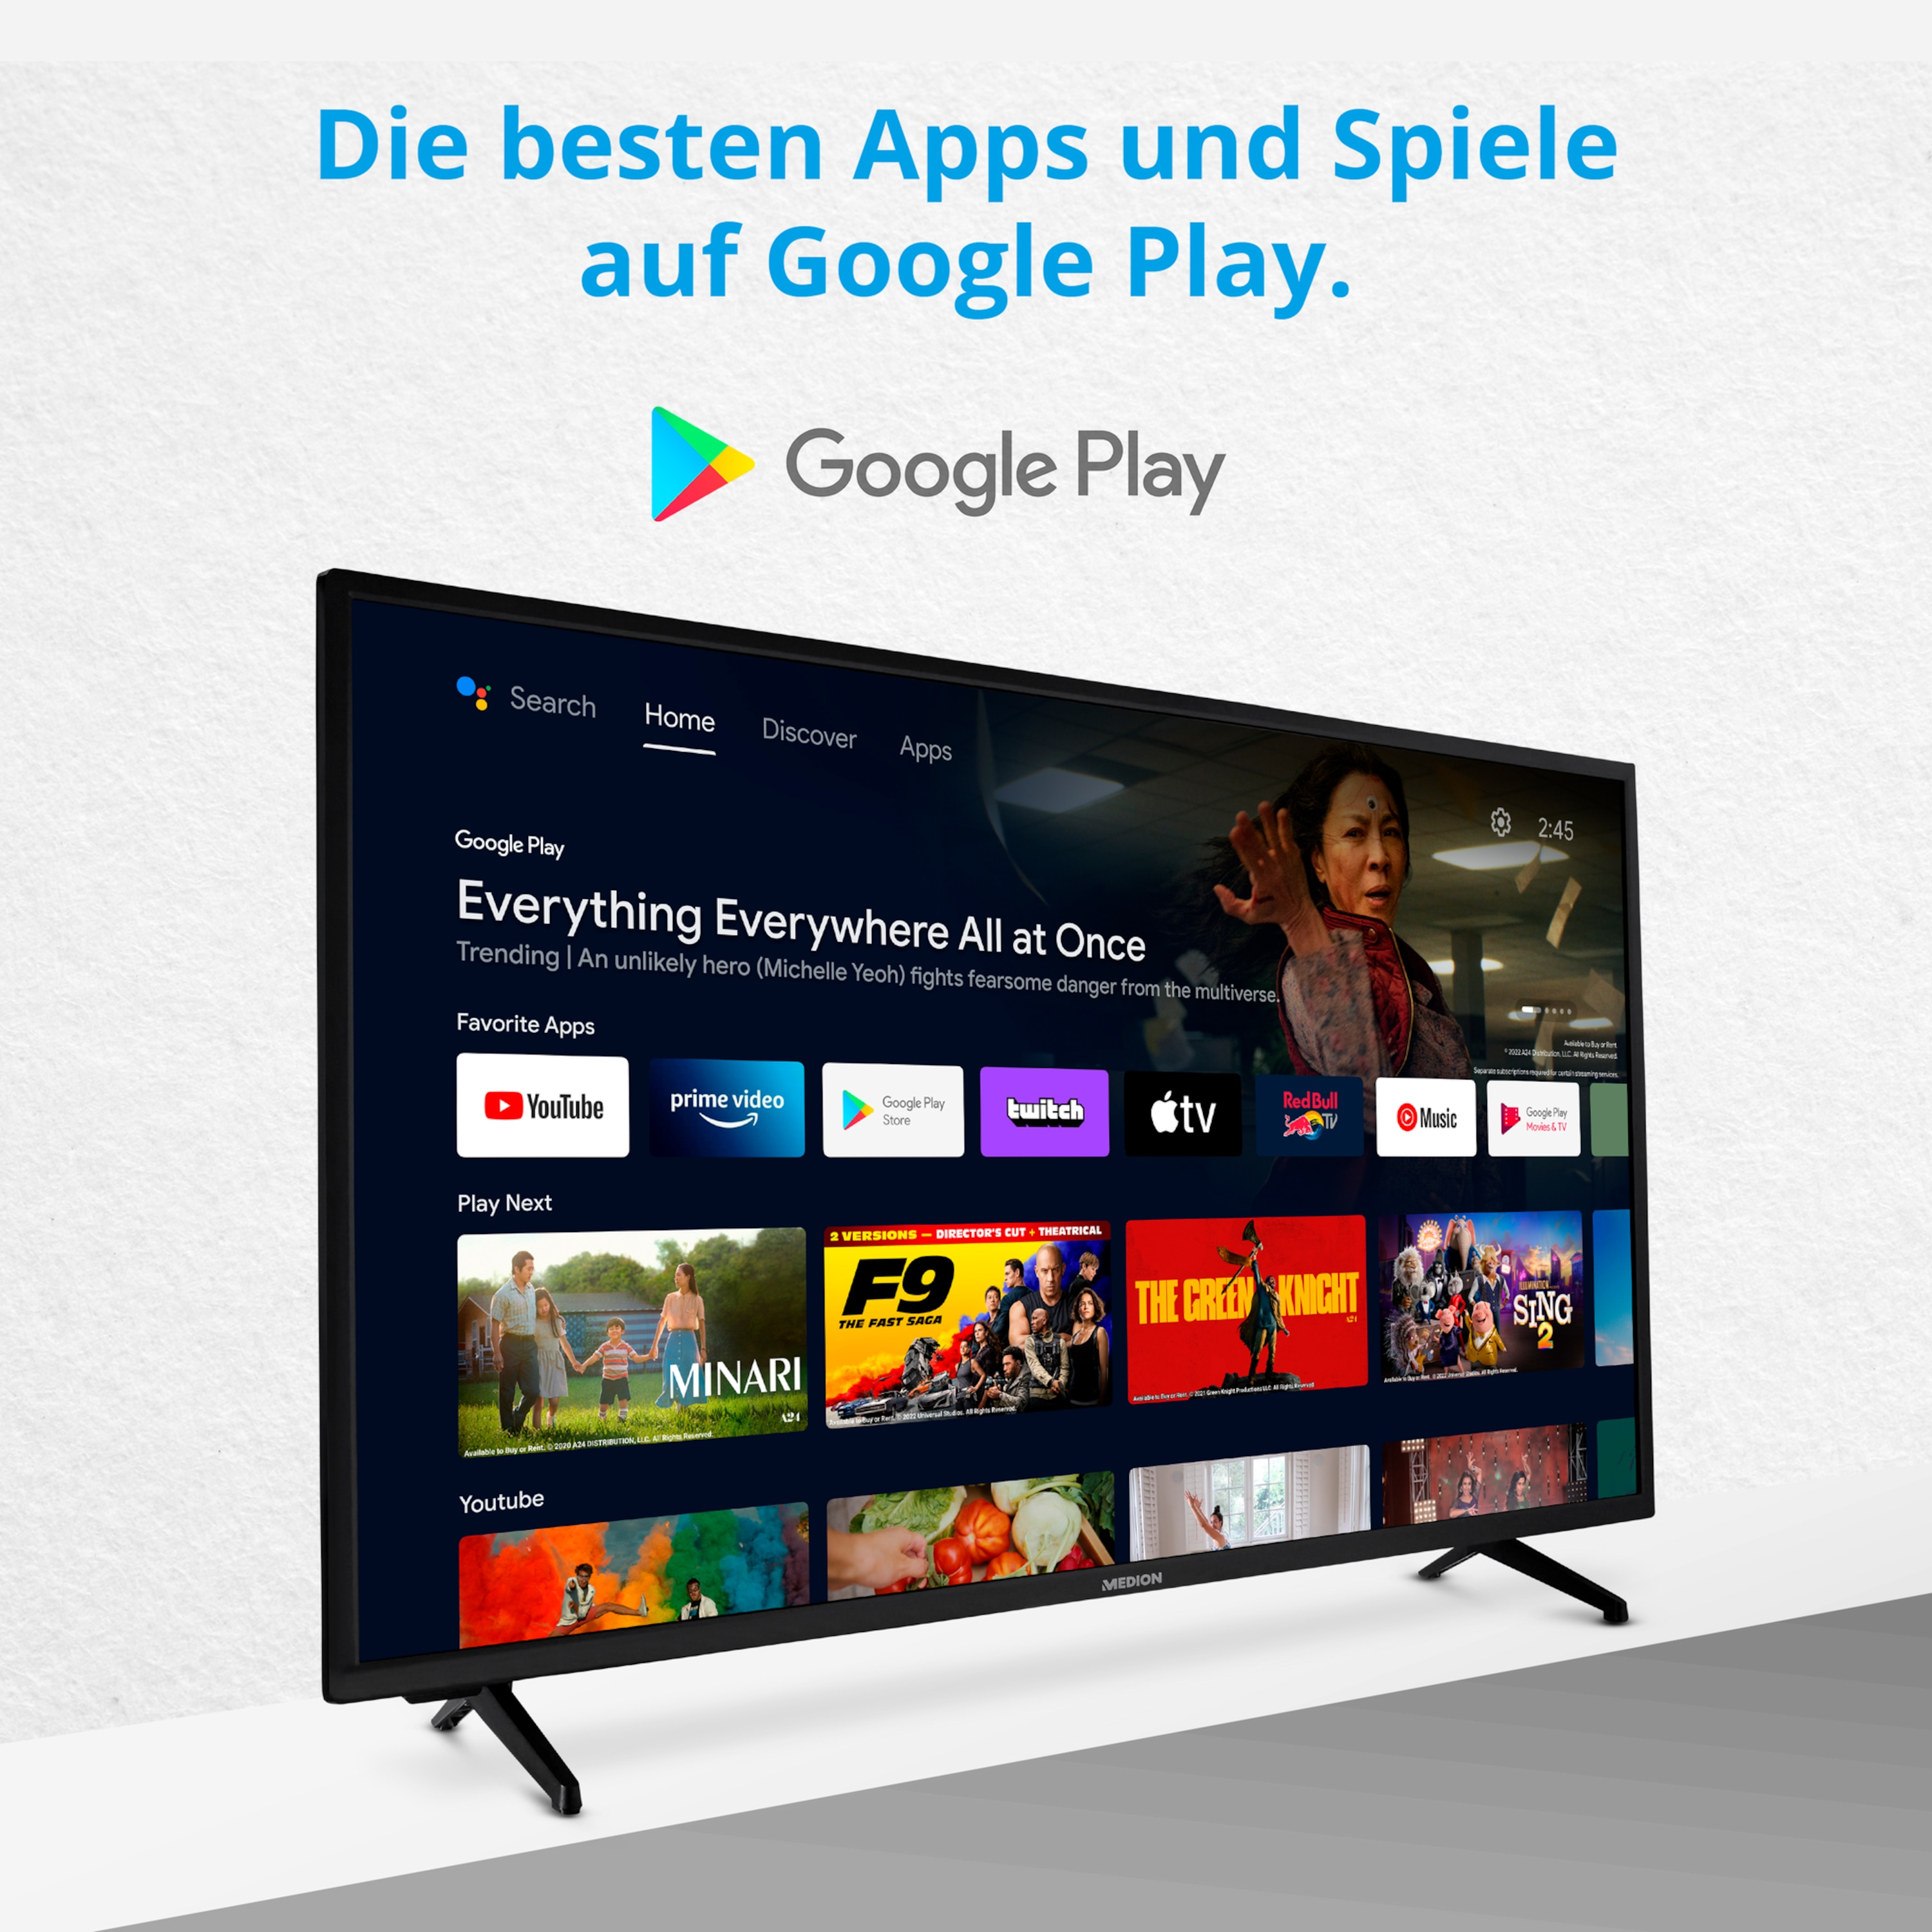 Android) 39,5 HD, Full Netflix Smart 40 Android MEDION TV (Flat, HD HDR Fernseher cm, mit / Fernseher Zoll 100,3 100,3 cm, Zoll, P14093 TV